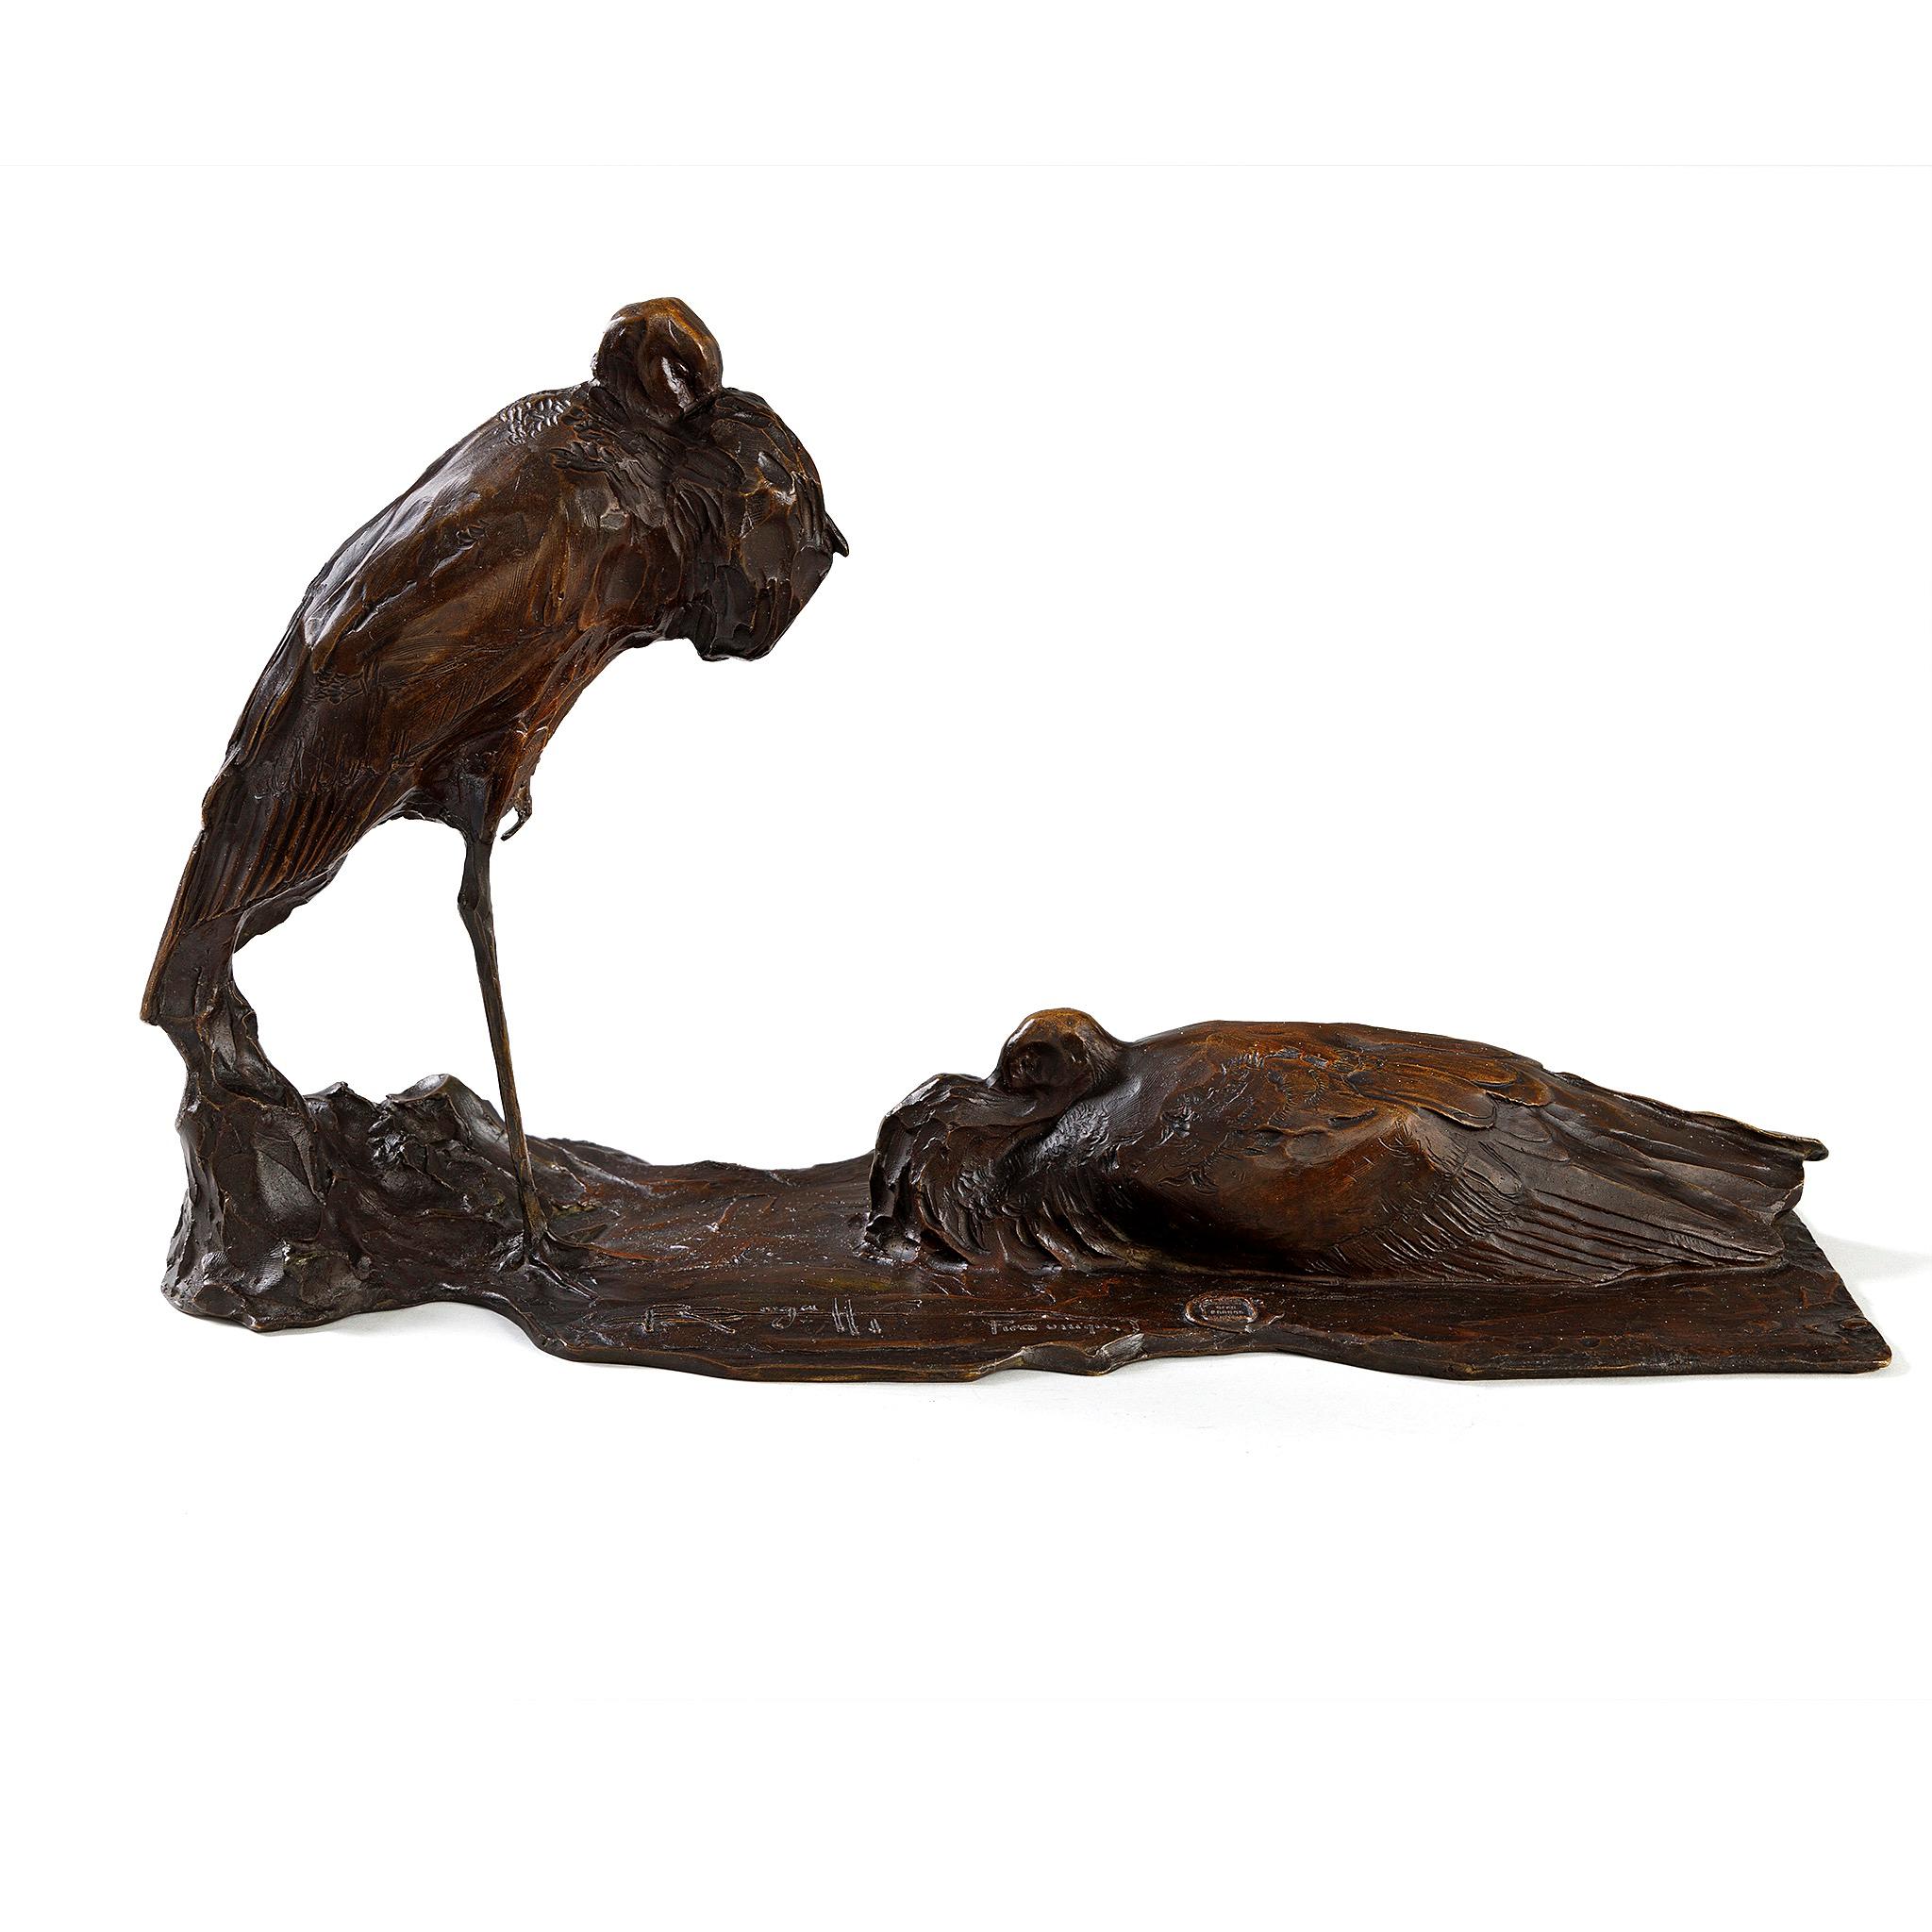 Rembrandt Bugatti's striking bronze depicts a pair of elegant white storks. The male stork, positioned on the left, gently rests its head upon its soft breast while tucking one of its feet close to its body to conserve warmth. Meanwhile, the female